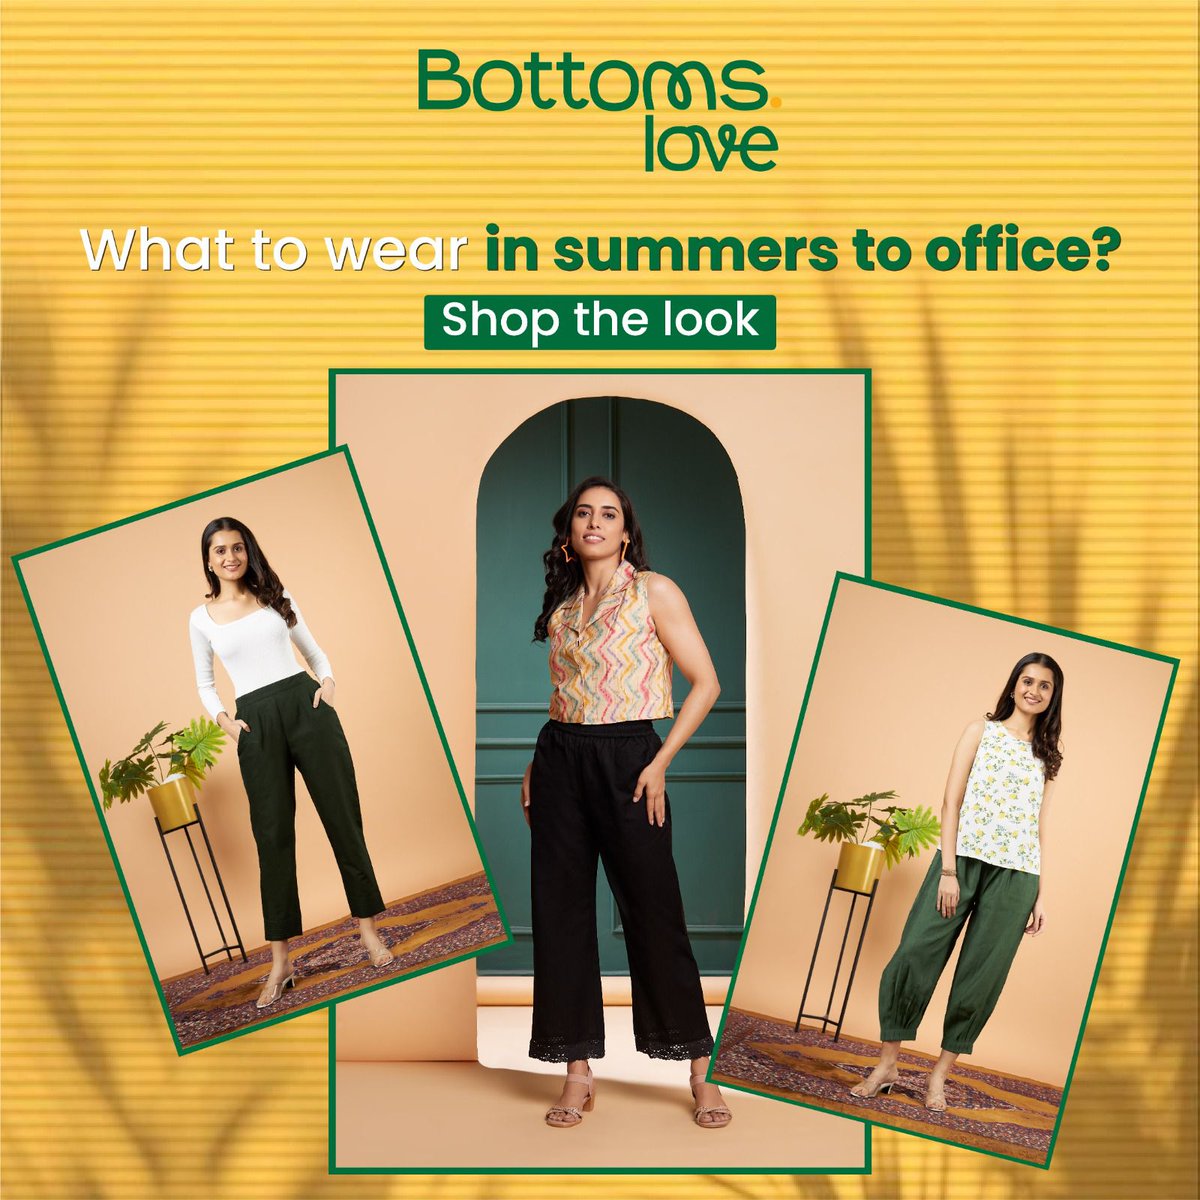 Don’t make office wear boring! 🙈

This summer level up your bottom wear with @bottoms.love and step into the summer with some cute outfits☀️🥰
.
.
.
.
.
.
.
#bottomwear #fashion #onlineshopping #tops #jeans #clothes #trending #trendy #womenswear #style